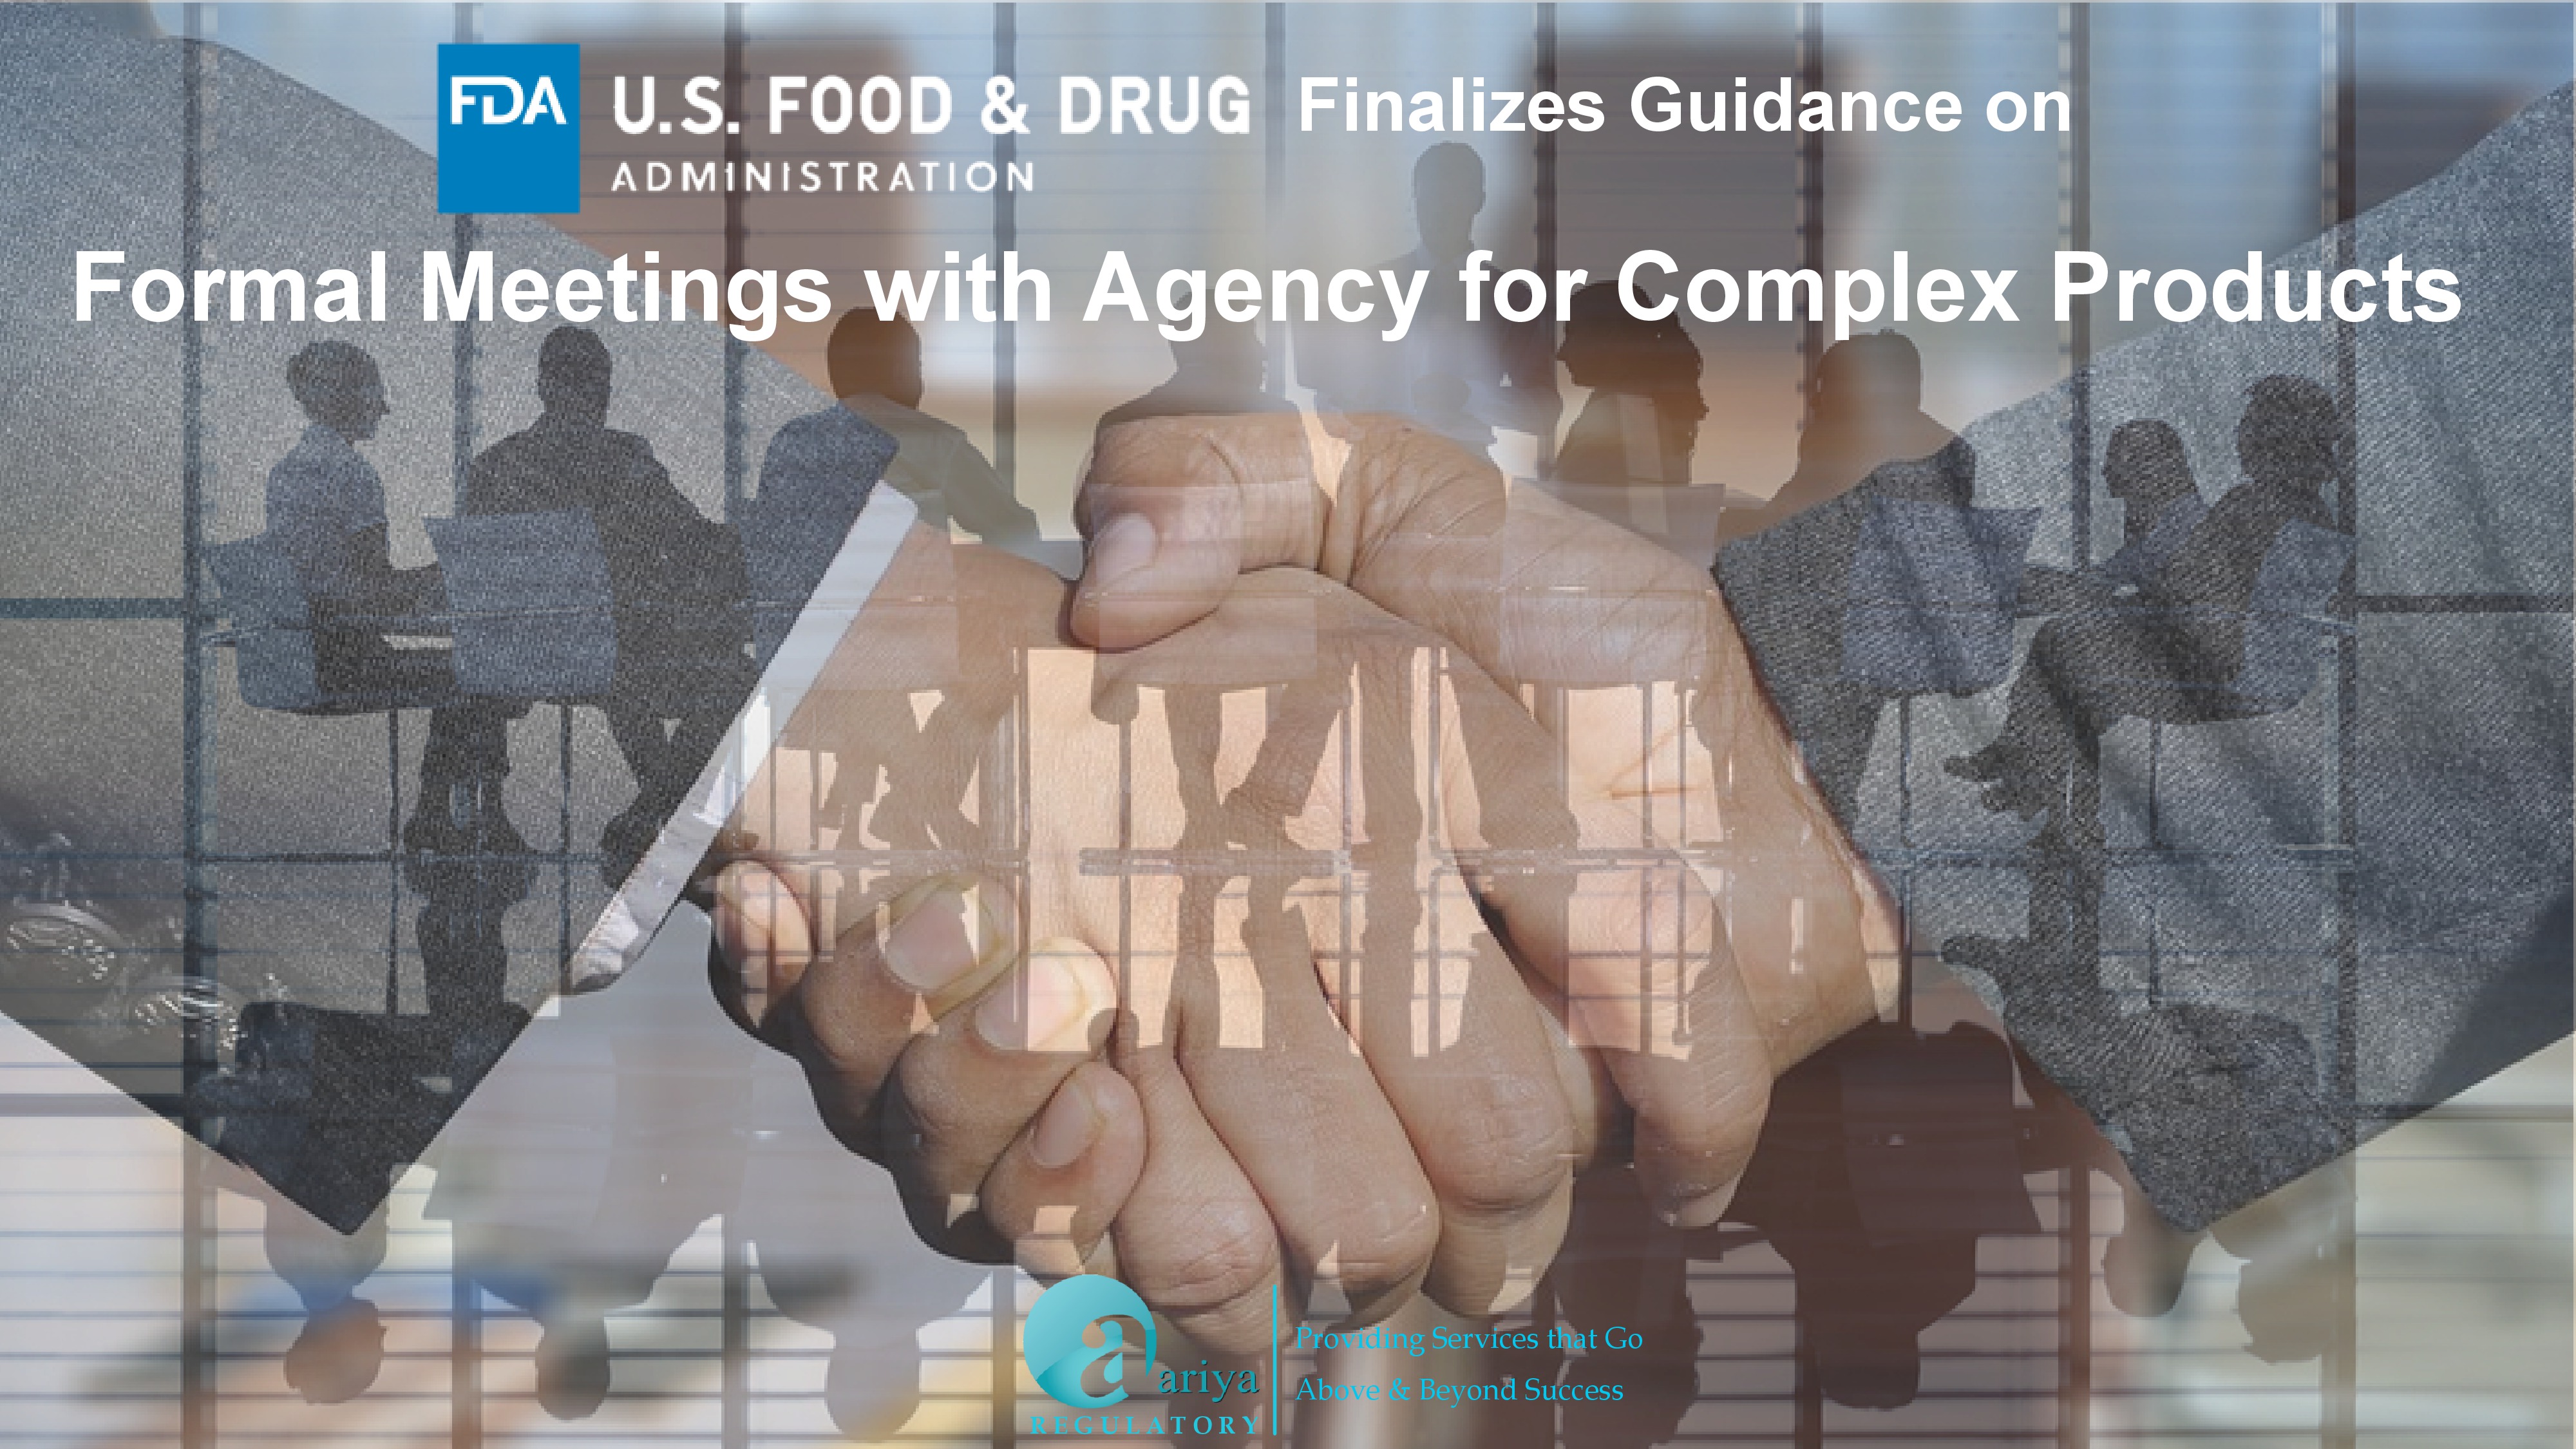 USFDA Finalizes Guidance on Formal Meetings with the Agency for Complex Products